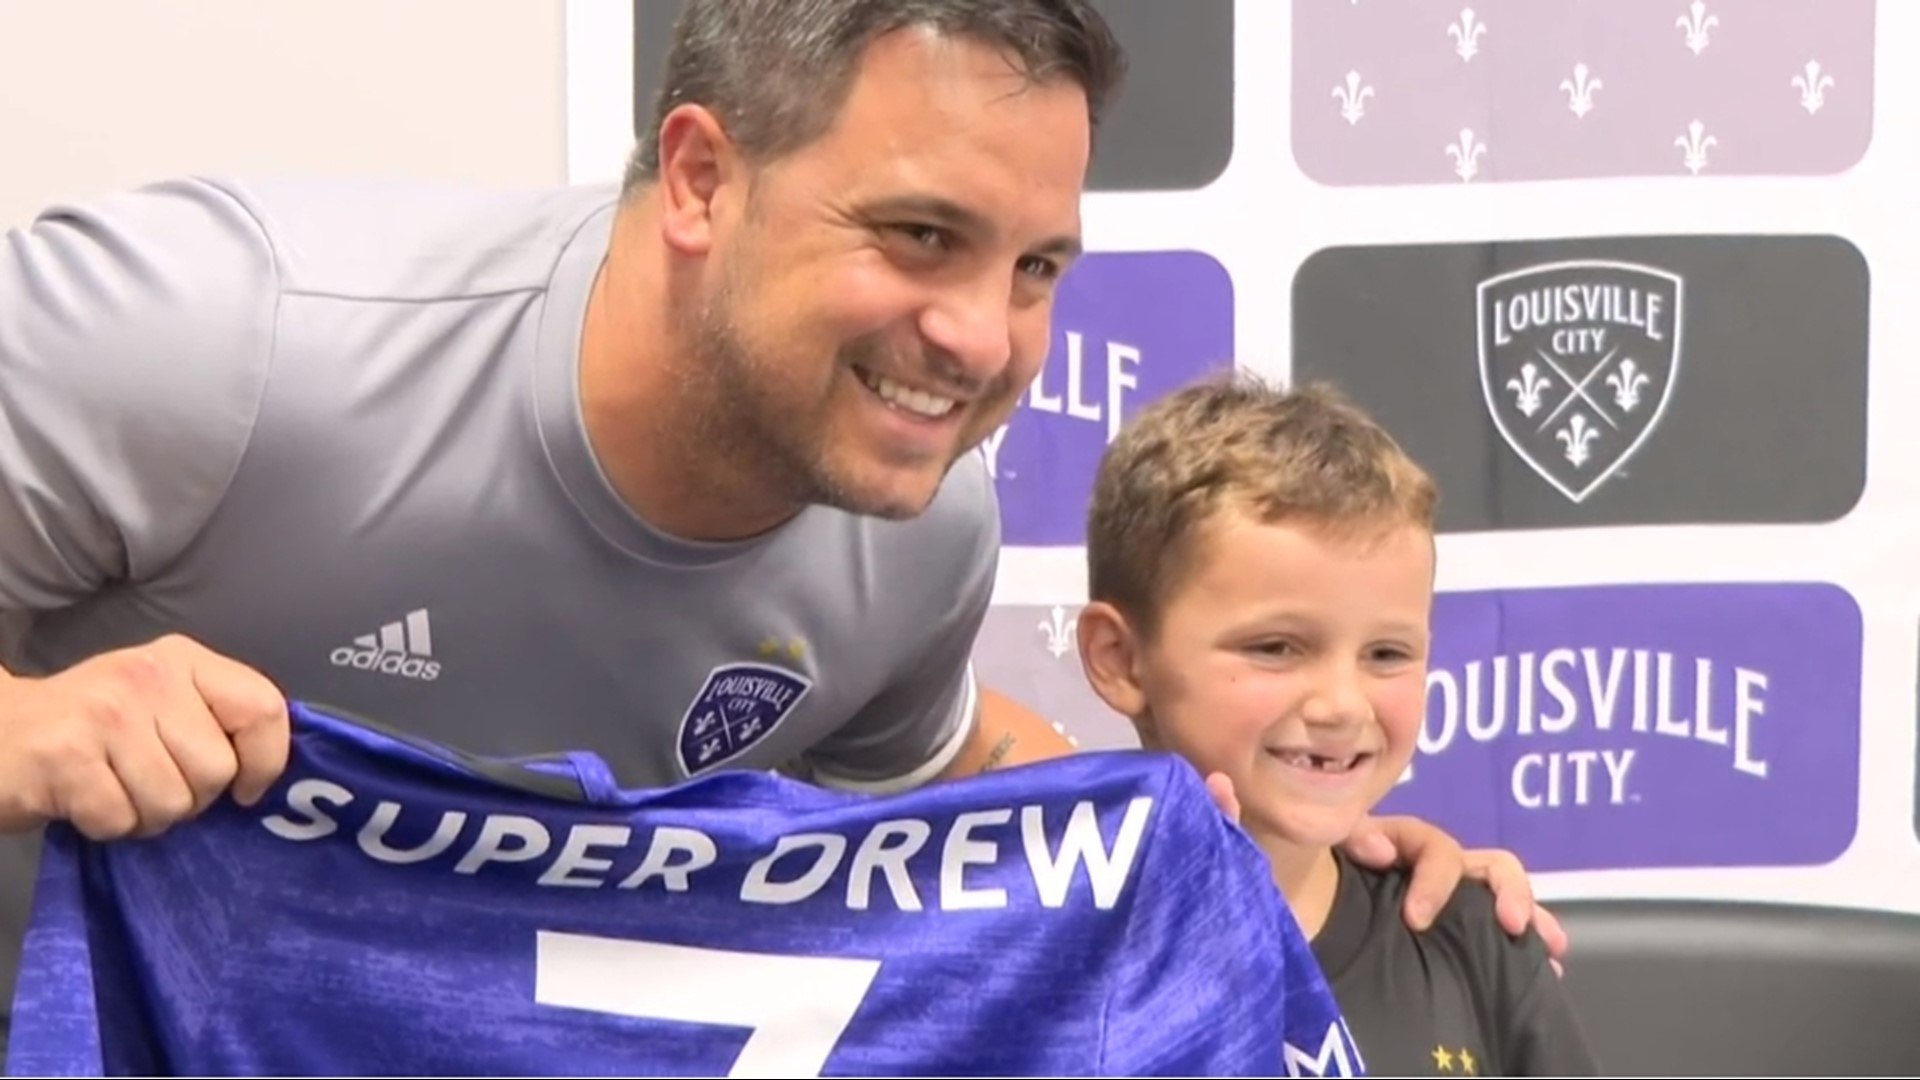 Young cancer warrior Drew Esposito's dream came true when he signed a short-term contract with the Louisville City FC.